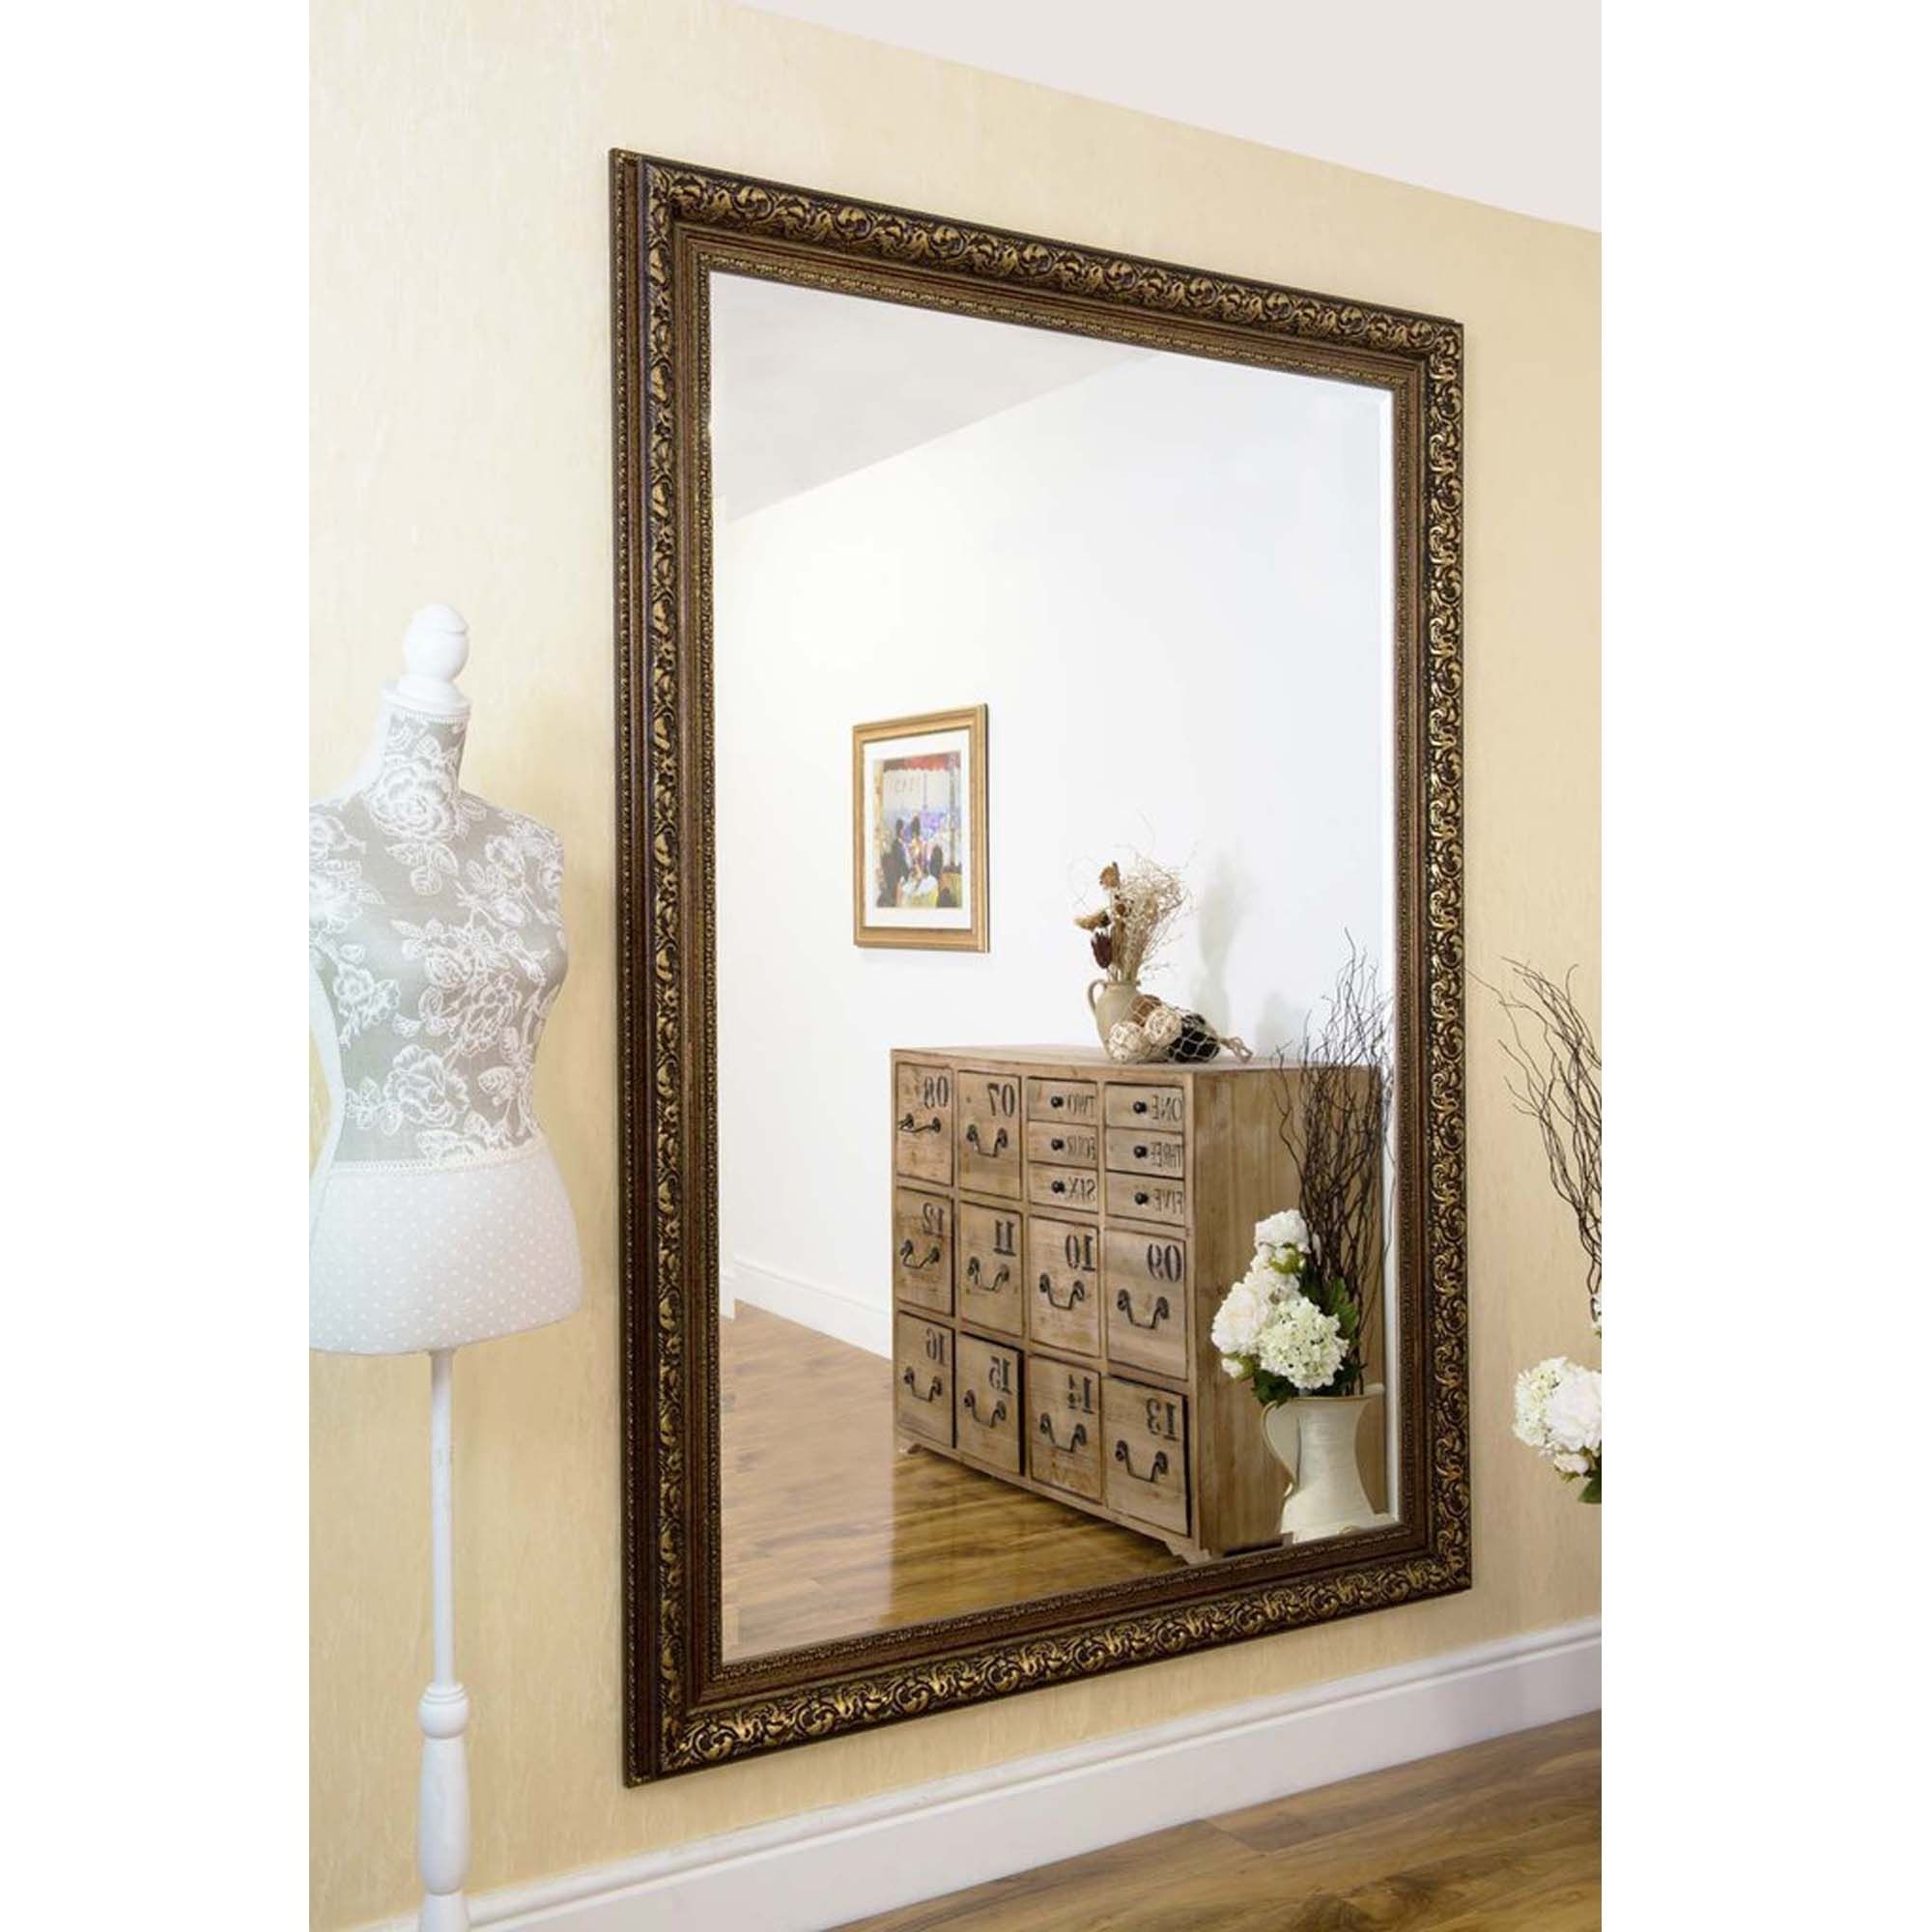 Large Rectangular Antique French Style Bronze Wall Mirror | Hd365 In French Brass Wall Mirrors (View 12 of 15)